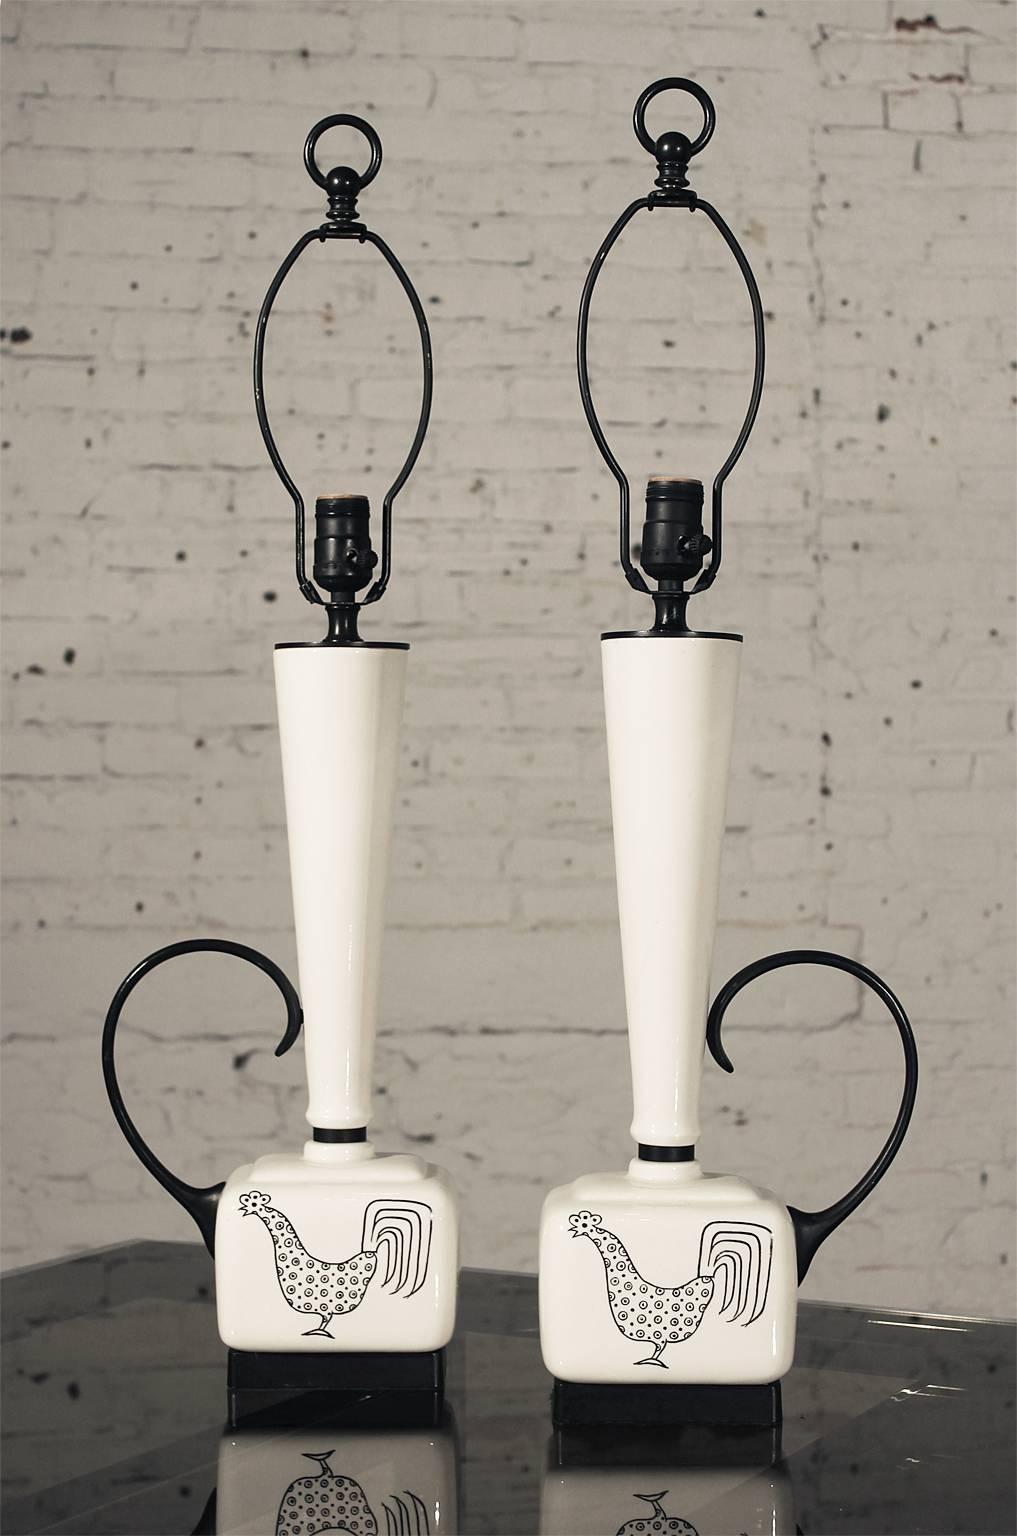 20th Century Mid-Century Modern Black and White Ceramic Lamps w/Rooster Design, Pair